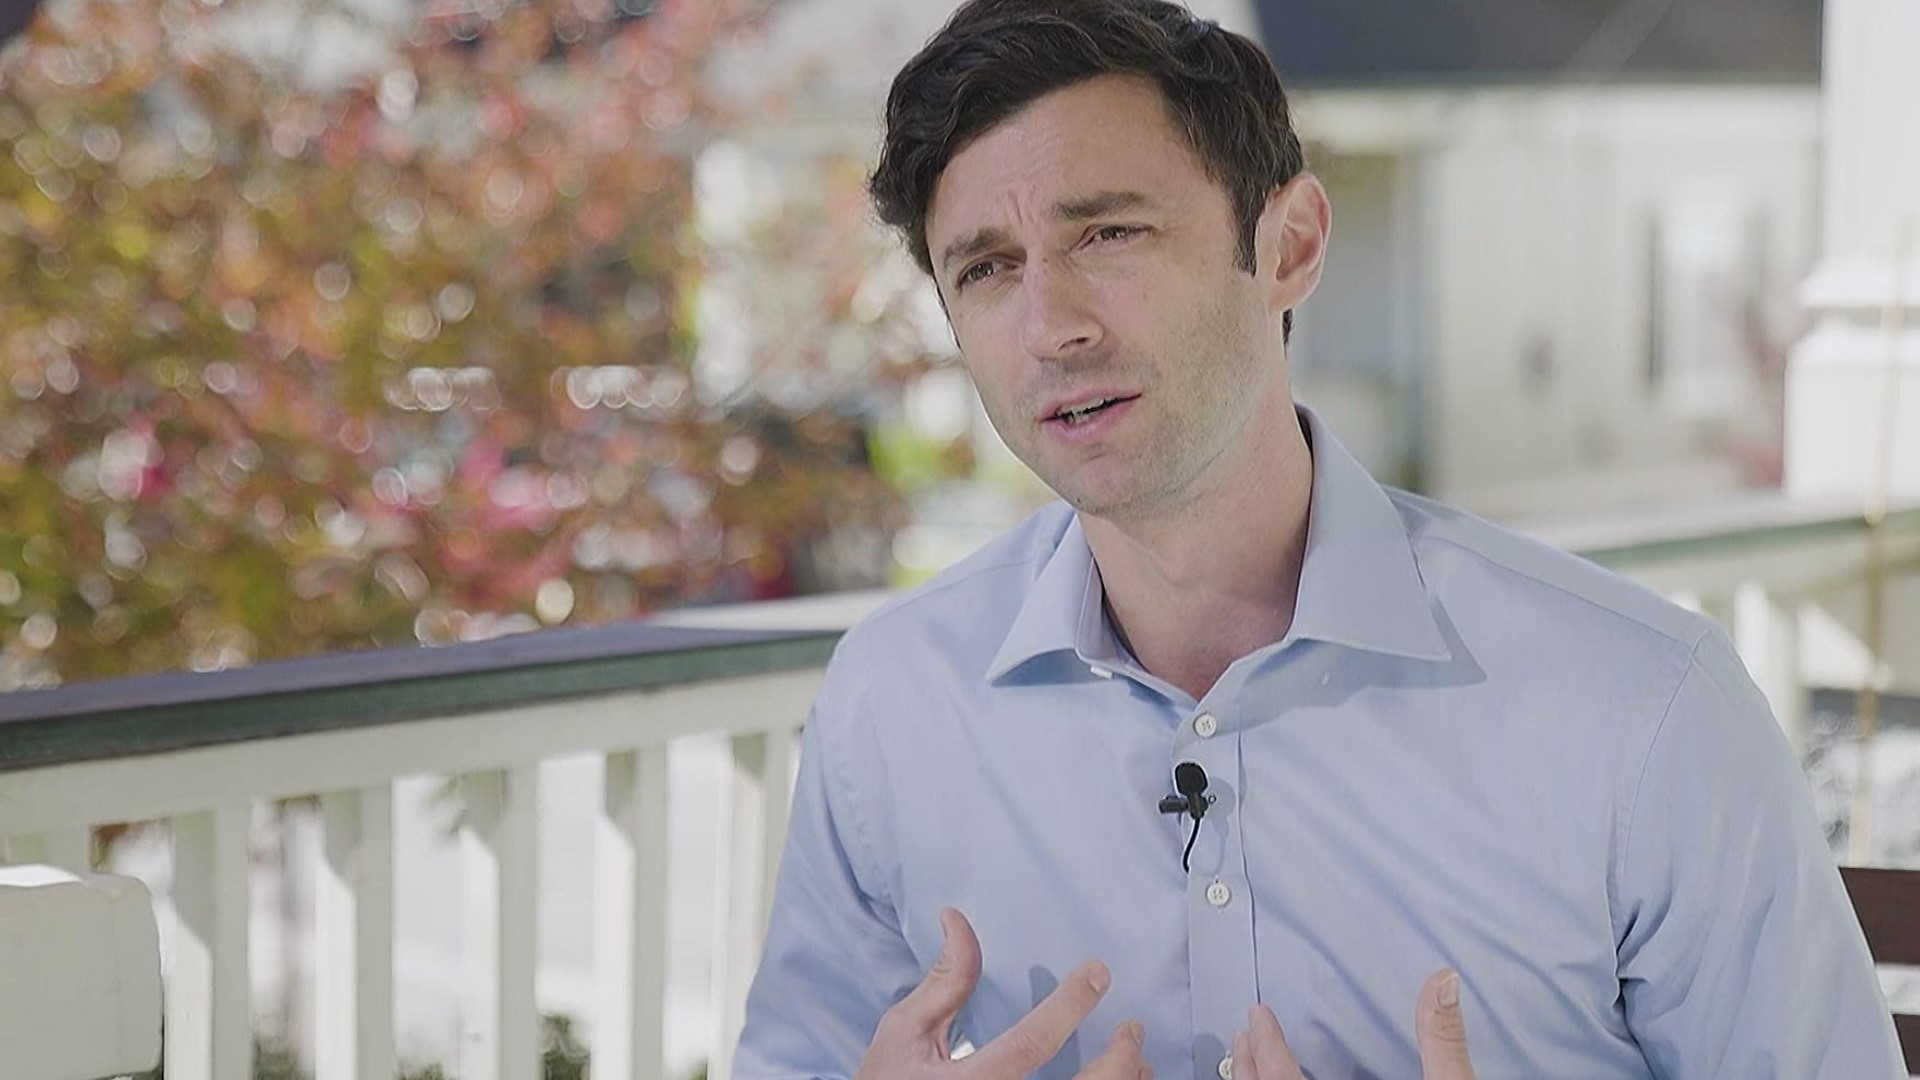 In a wide-ranging interview with 11Alive on Monday, U.S. Senate candidate Jon Ossoff focused on the urgency of the pandemic and his immediate priorities.